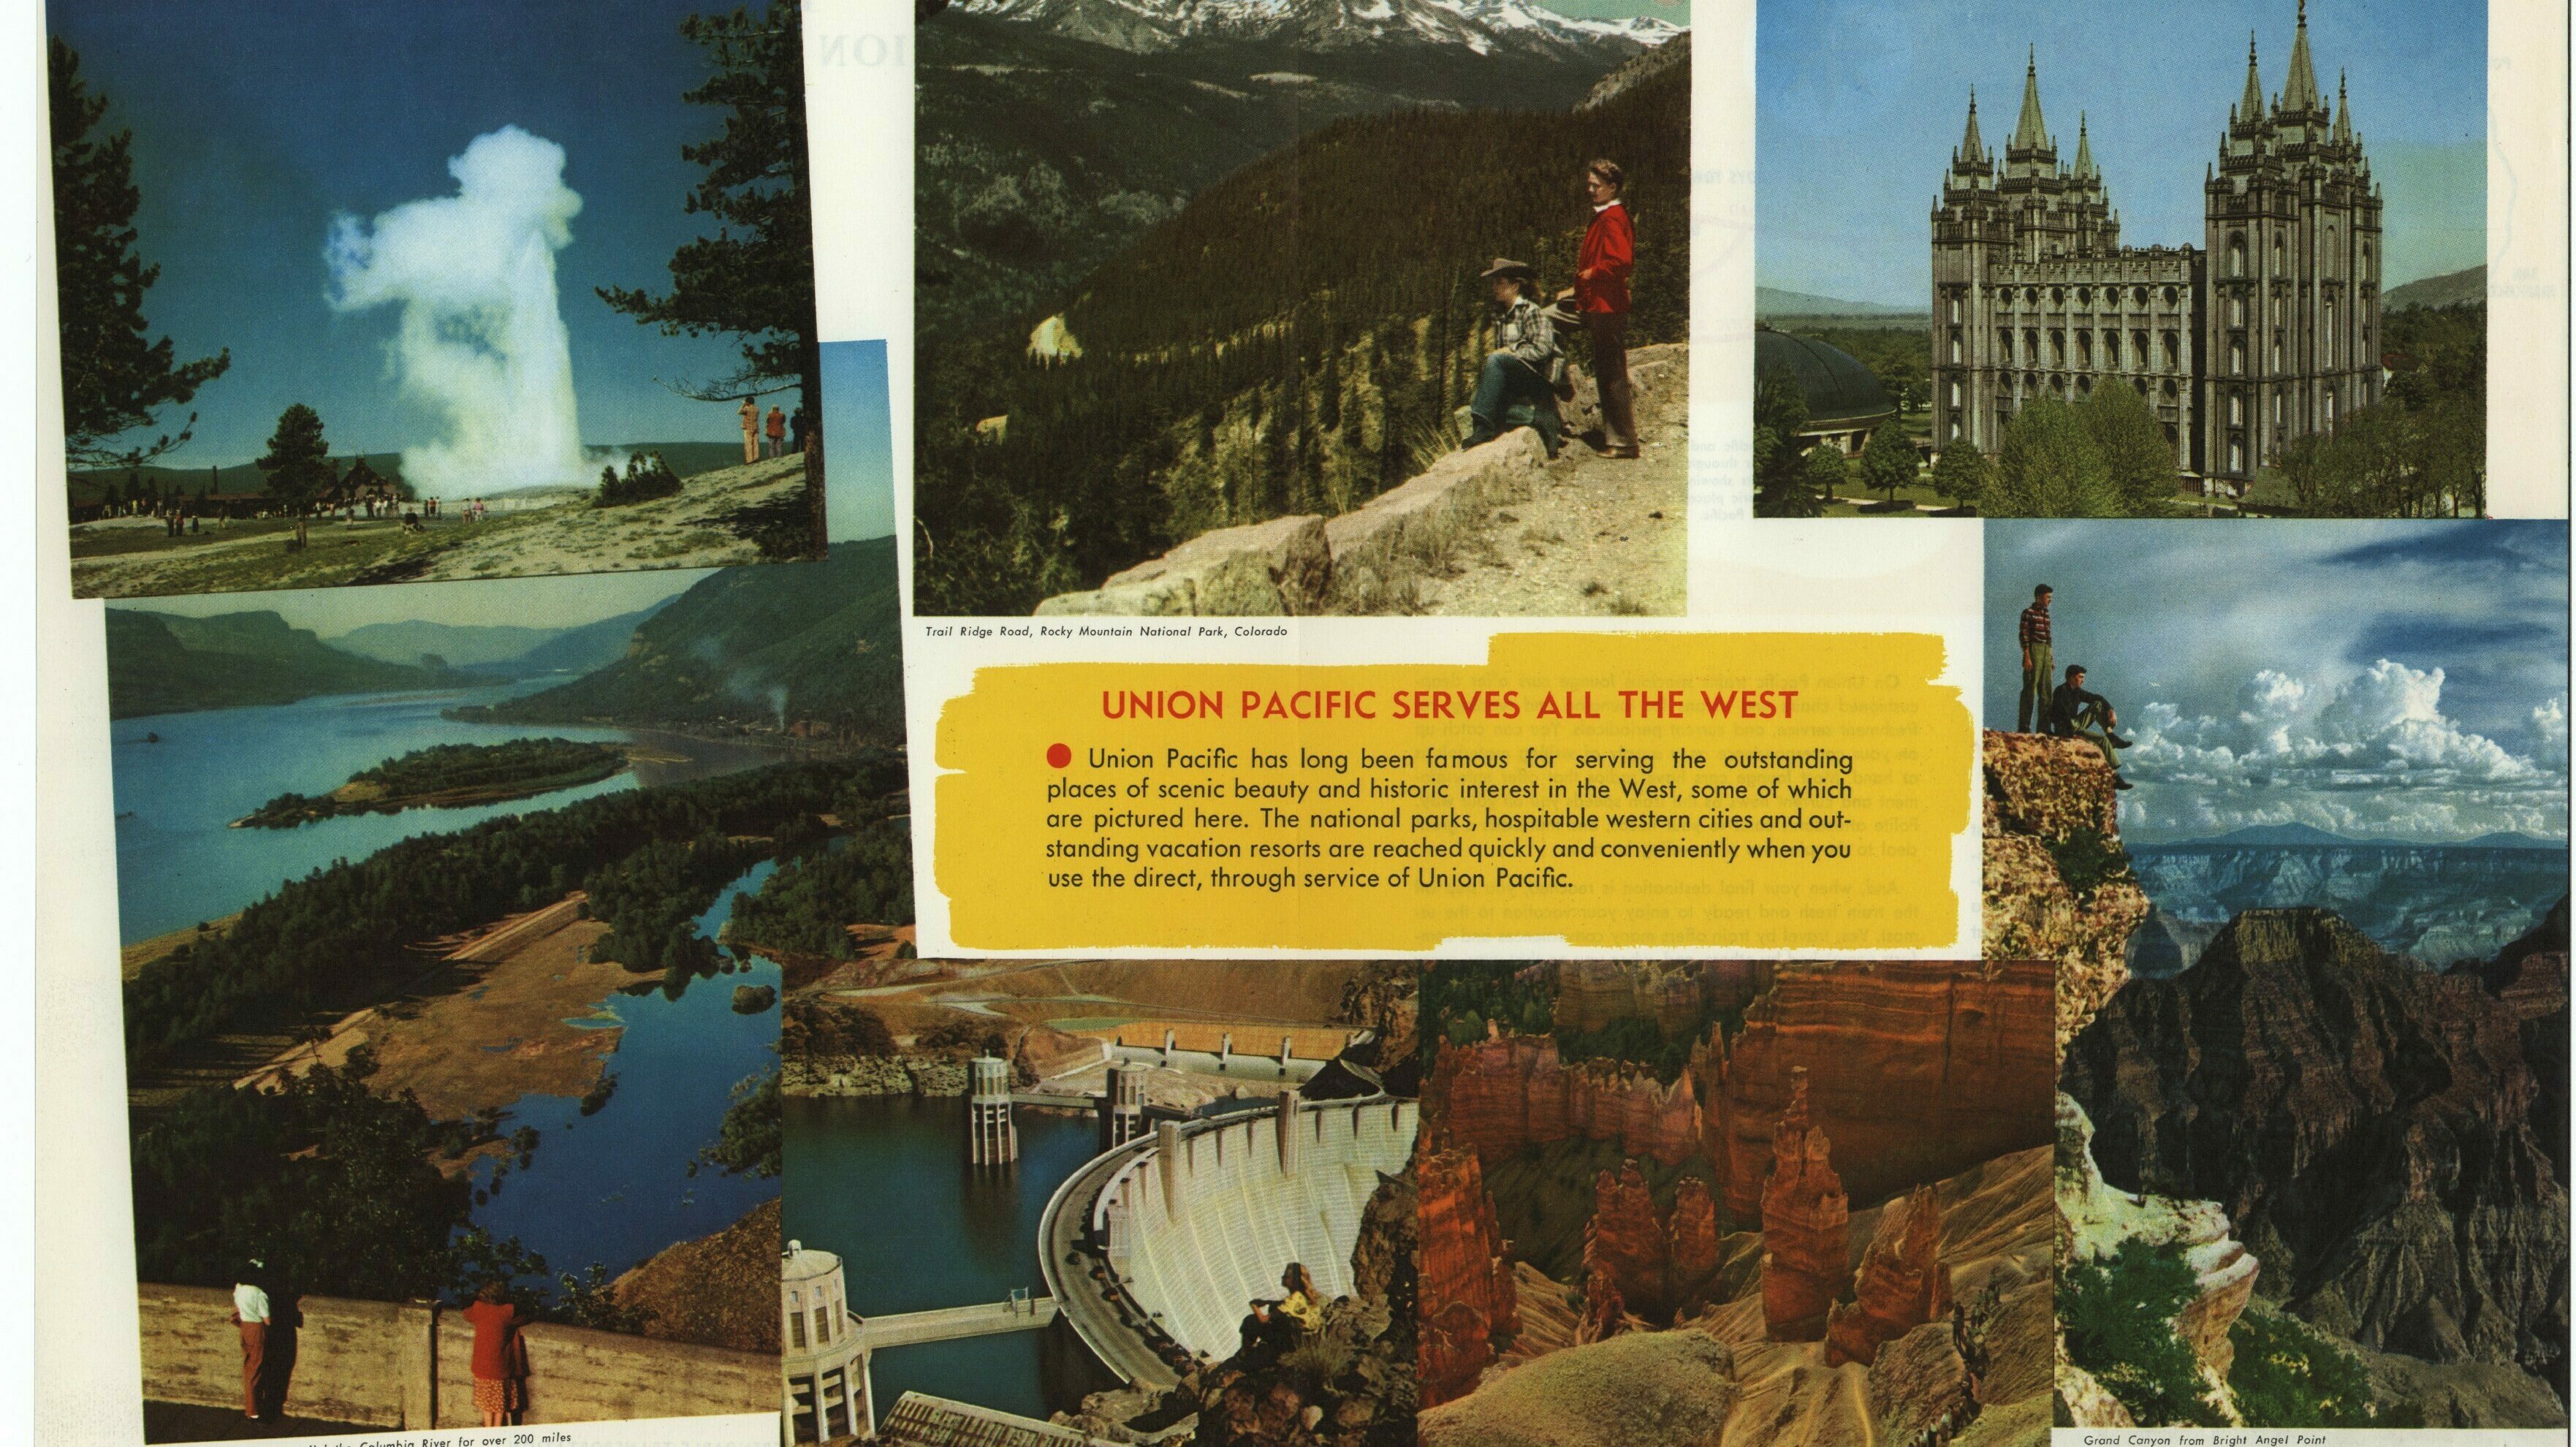 Union Pacific and the National Park Foundation